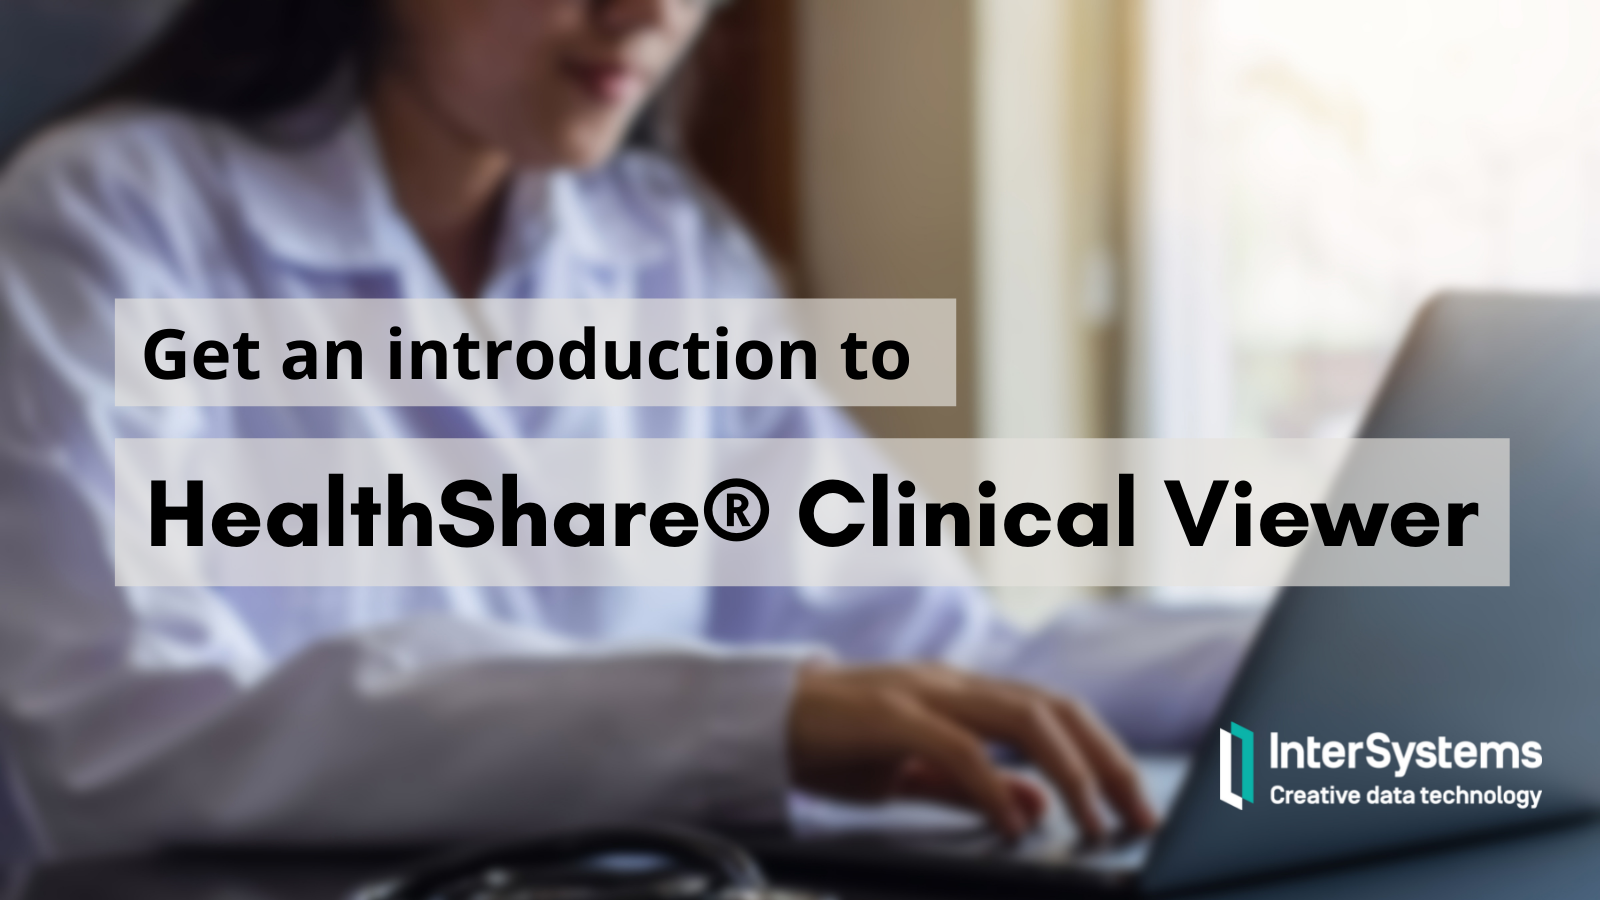 Get an introduction to HealthShare® Clinical Viewer